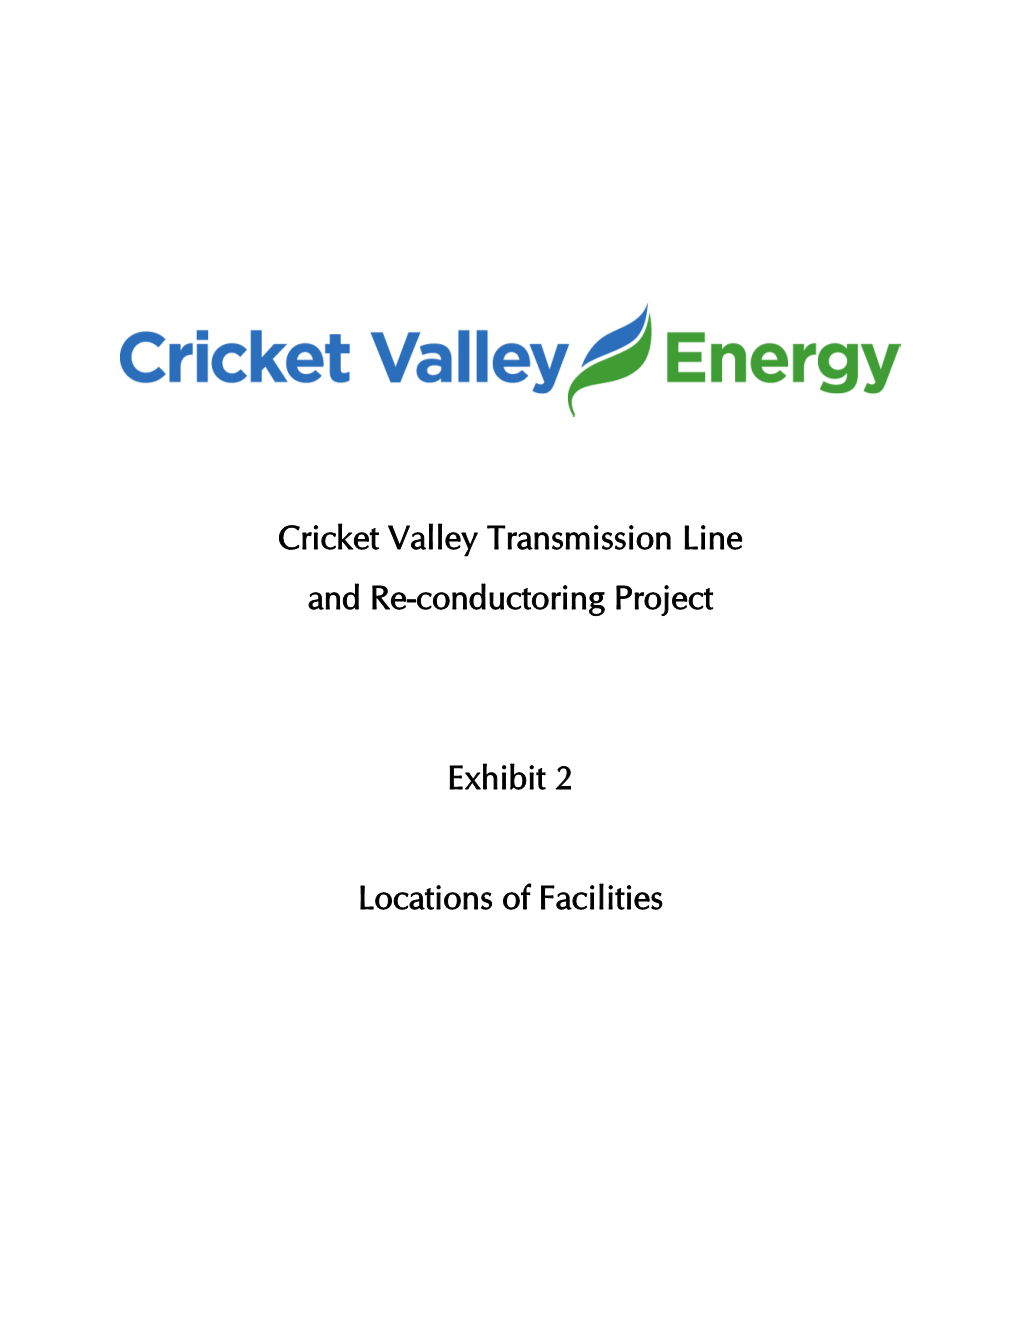 Cricket Valley Transmission Line and Re-Conductoring Project Exhibit 2 Locations of Facilities